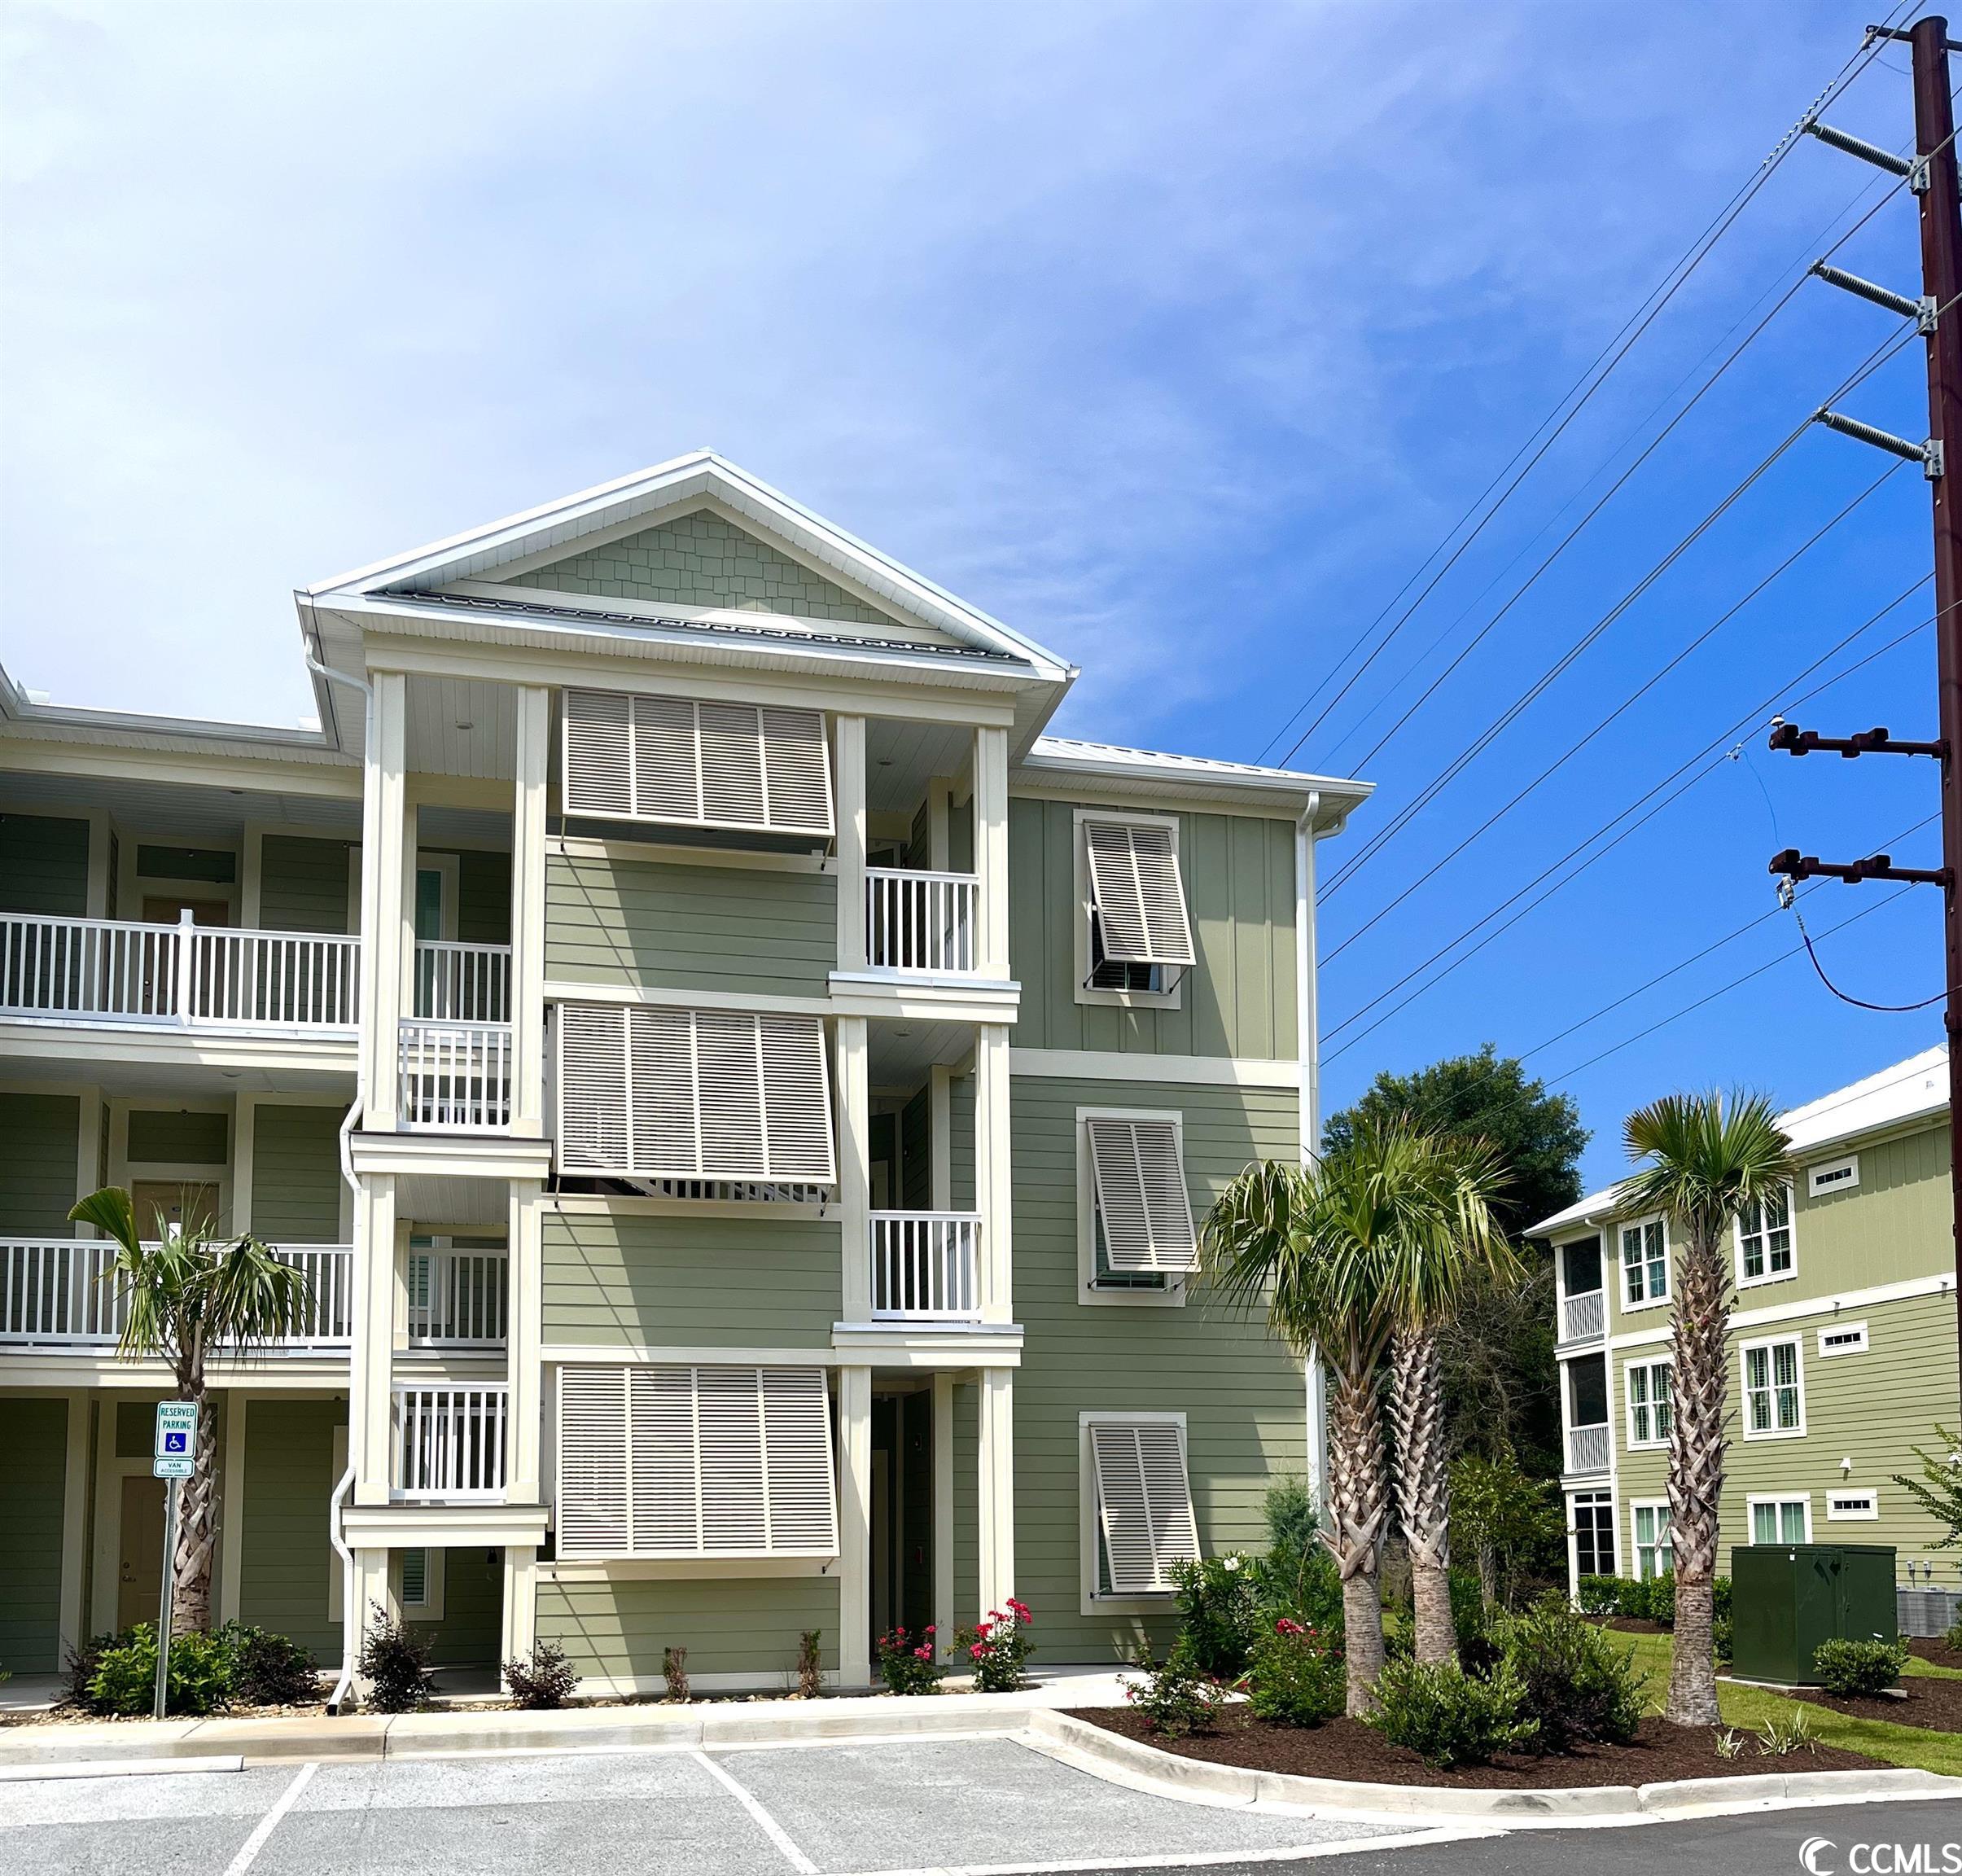 located in the heart of pawleys island, this end unit condo offers easy and convenient coastal lifestyle living. an affordable opportunity to have your own place at the beach. there is an extra "flex room" which may be used for an office, playroom or spare bedroom. elevators and a pool, hardwood floors, granite countertops, and a screened porch are a few of the details you'll love! while being located near public tennis courts, a fitness club, shopping and dining, you are also only a short drive to the beach, the river, golf courses, marches and marinas. this home offers all that you are hoping for in a sc beach community. unfurnished photos are of this unit. furnished photos are from a previously built model.